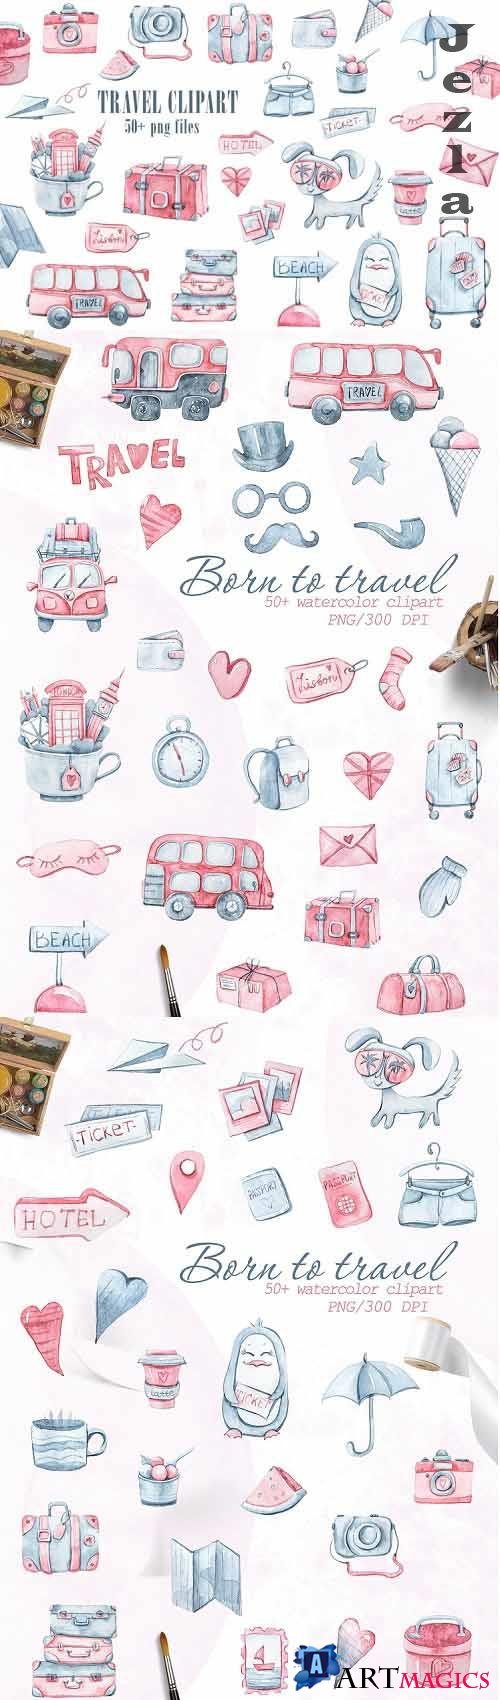 Watercolor travel clipart. Bags, cameras, tickets png files - 1179218